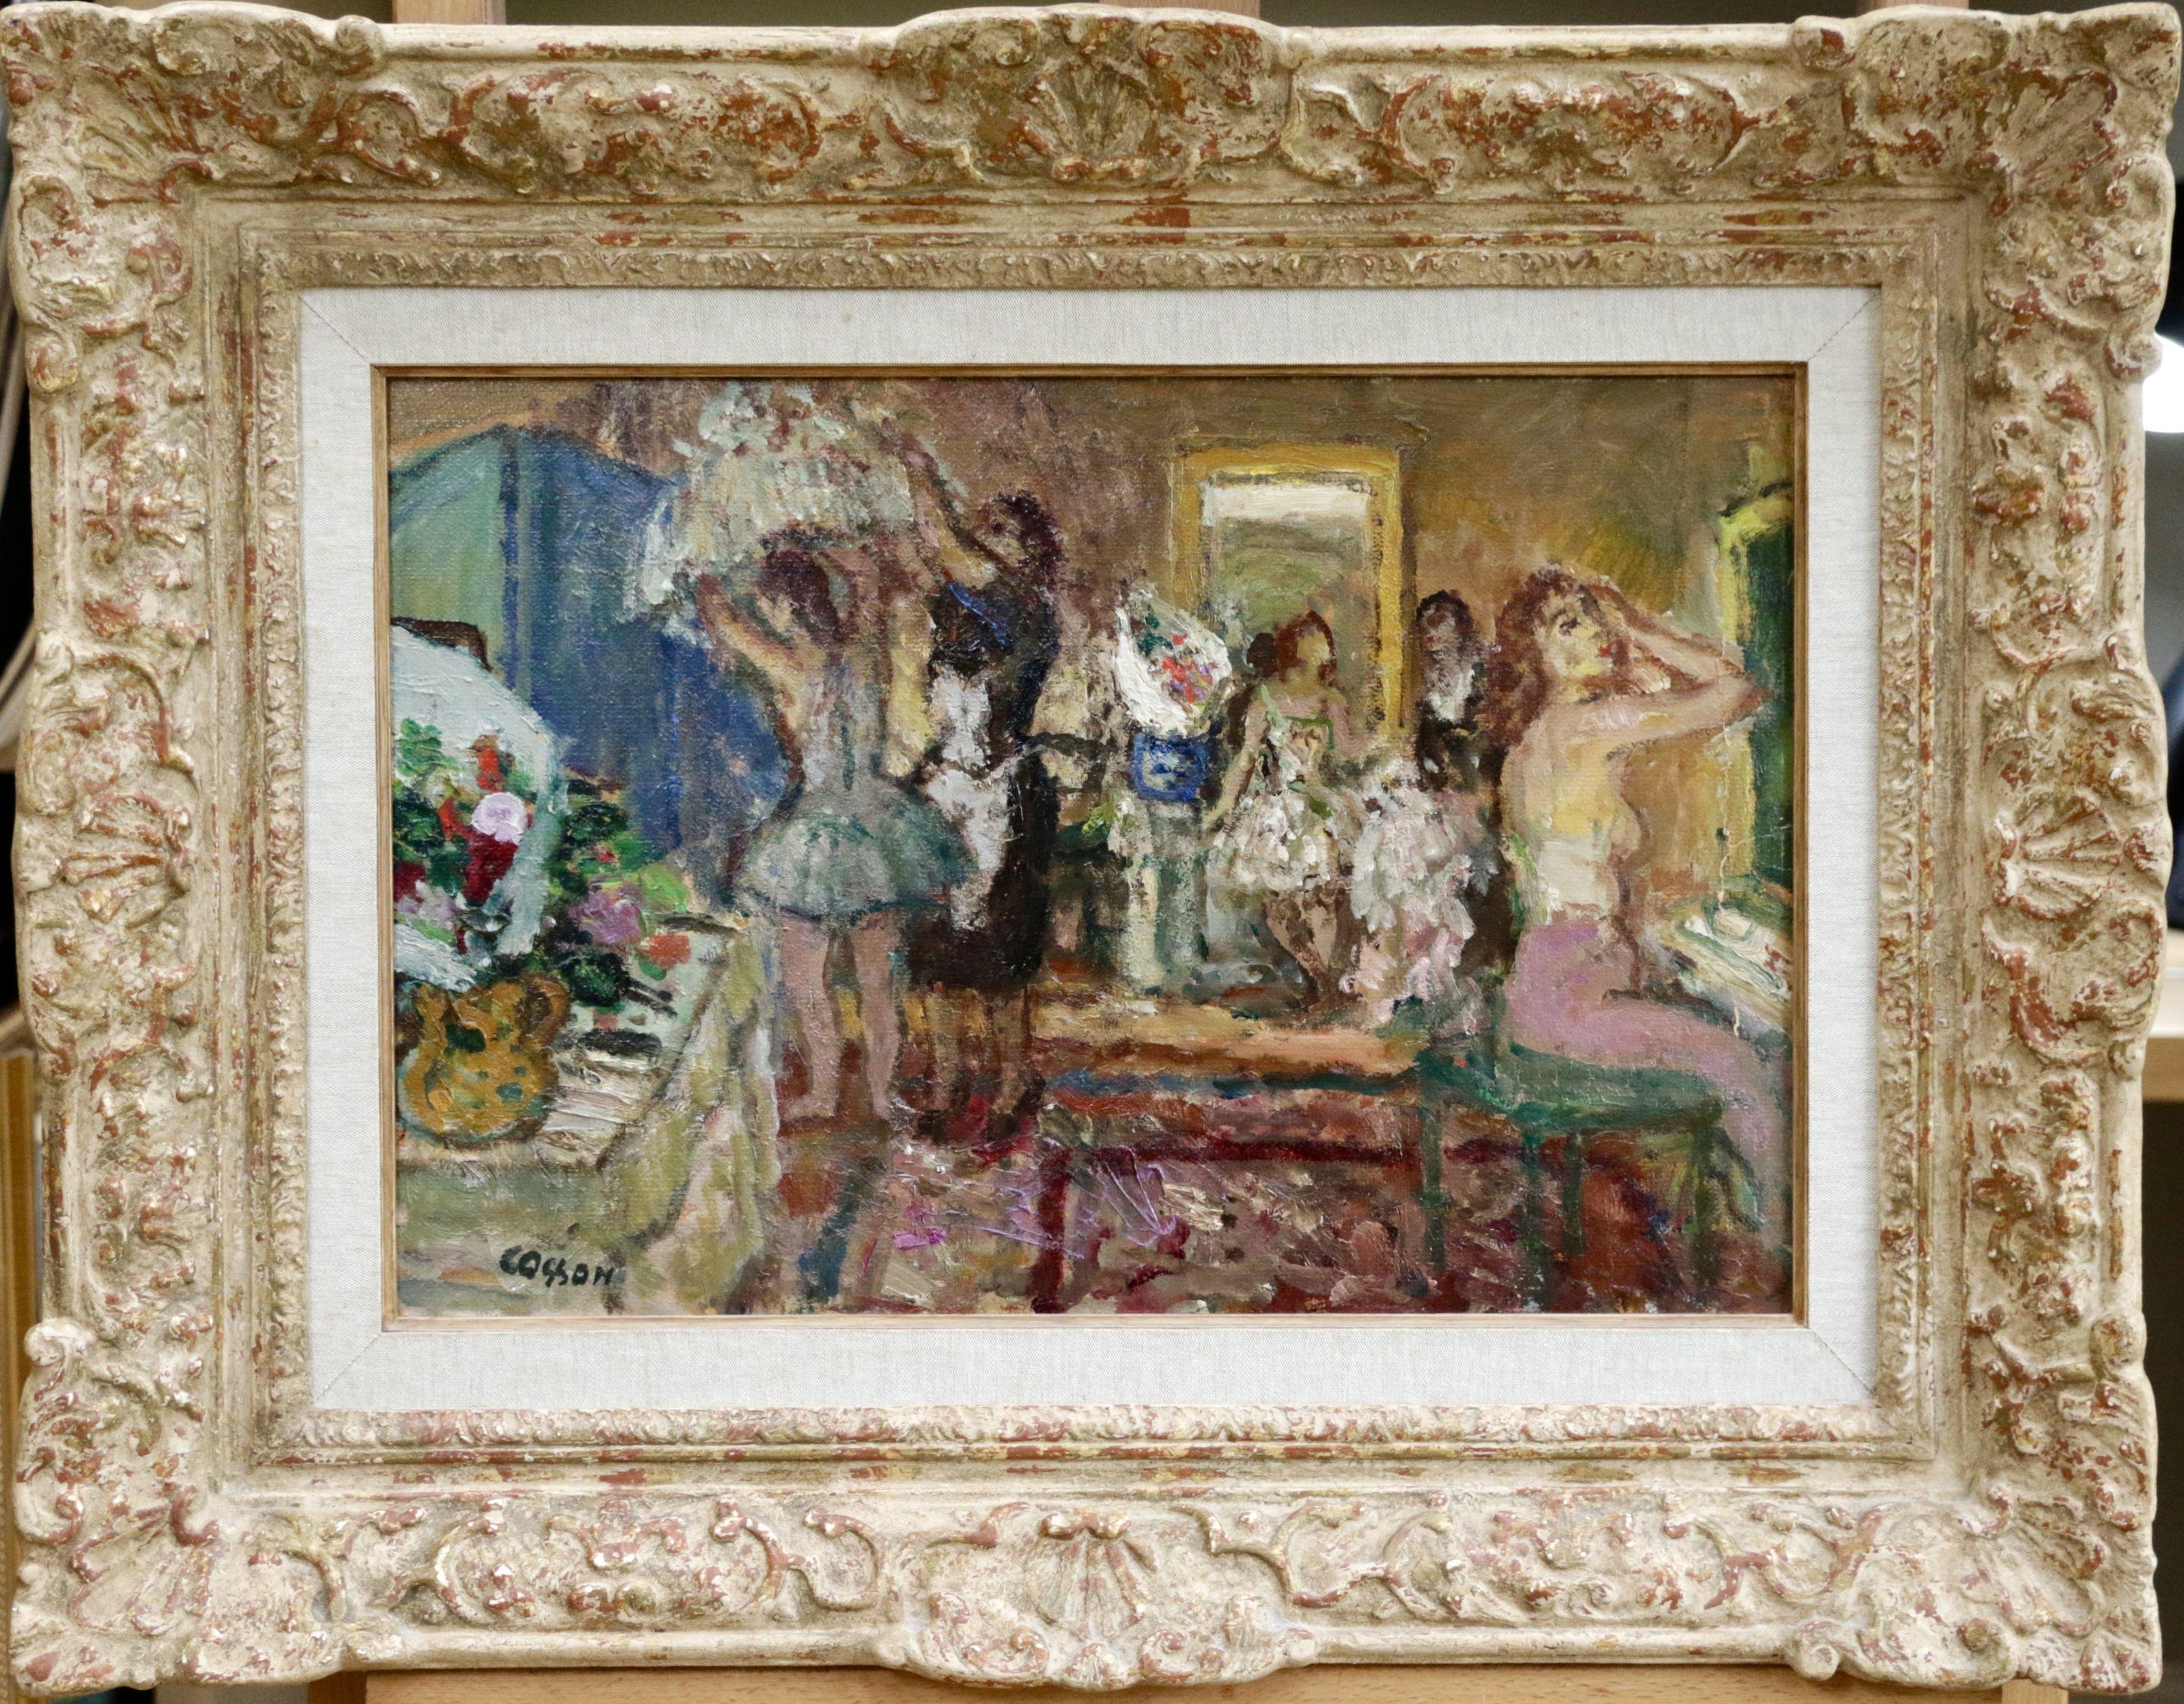 Jean-Louis-Marcel Cosson Interior Painting - Dancers in Dressing Room - Mid 20th Century Oil, Figures in Interior by Cosson